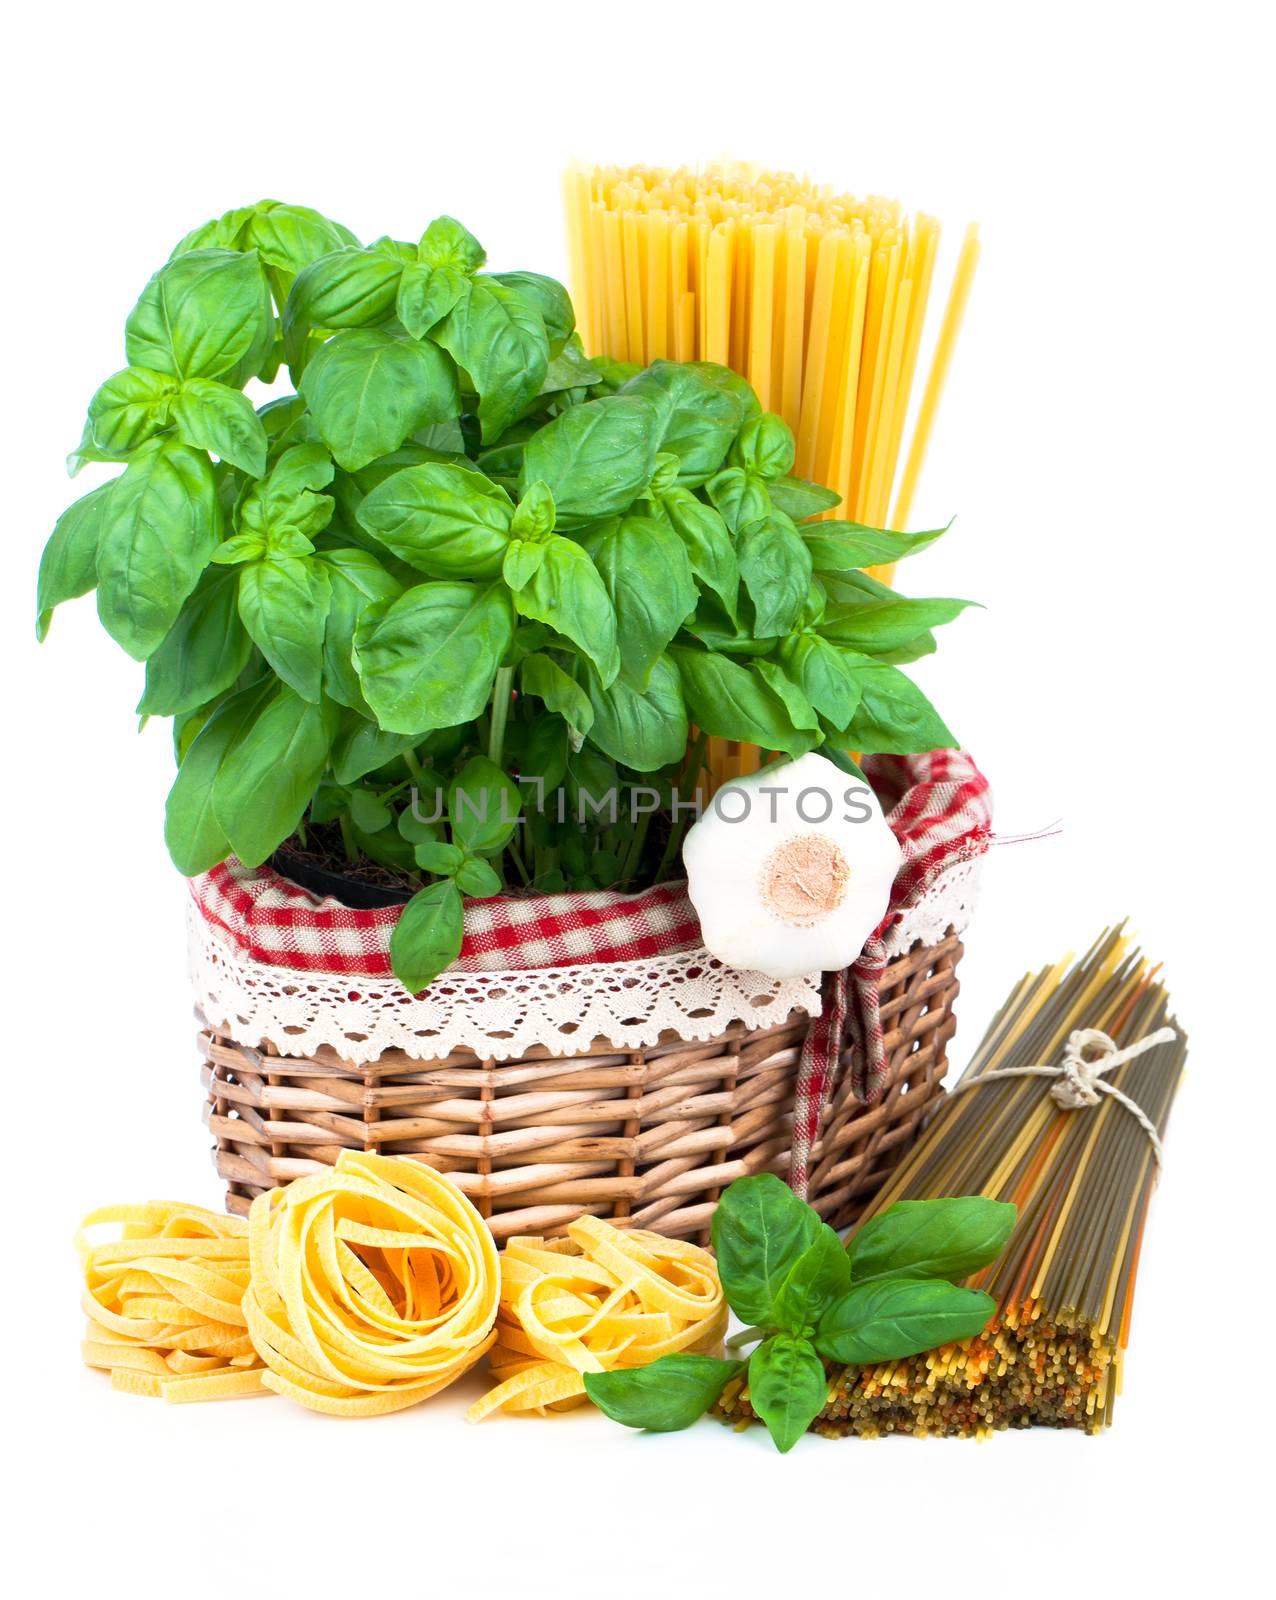 Fresh pasta and italian ingredients, isolated on white backgroun by motorolka